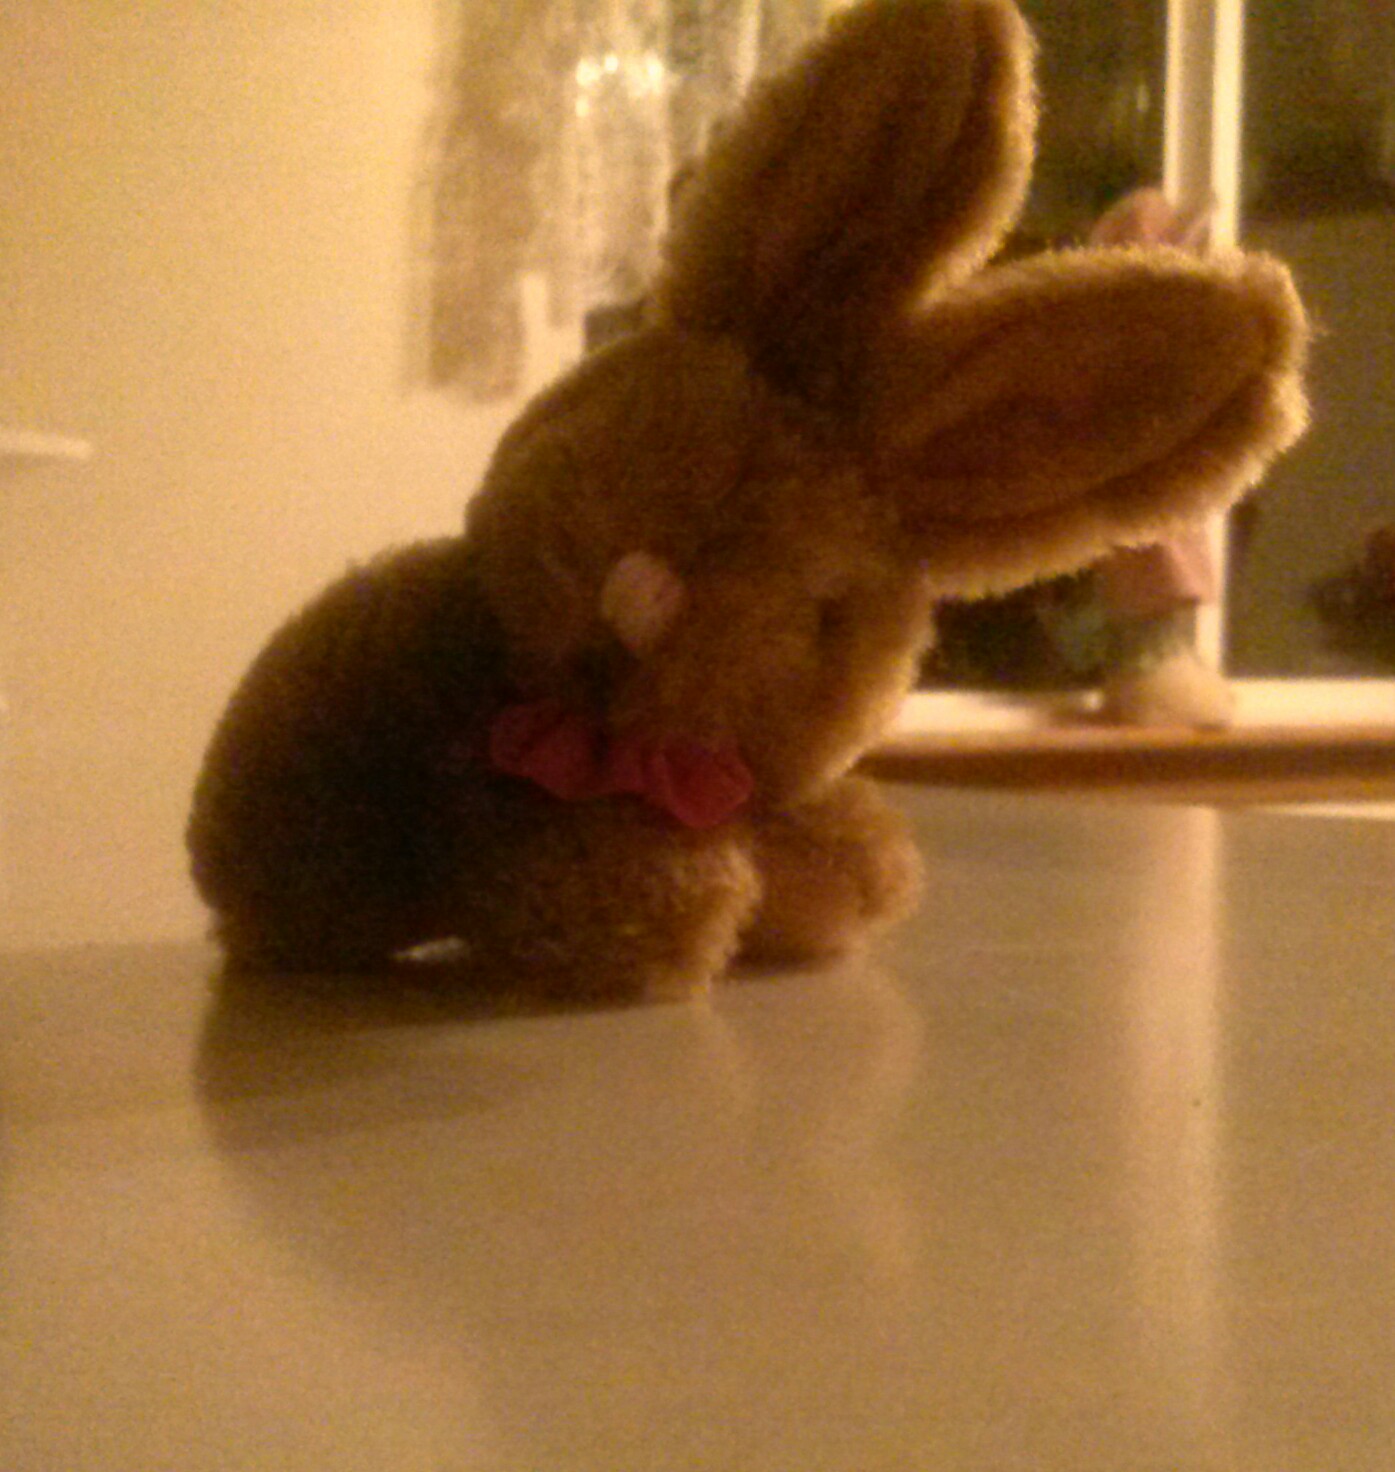 its a tiny bunny its name is little raggady man cus its wearing a bow.tie